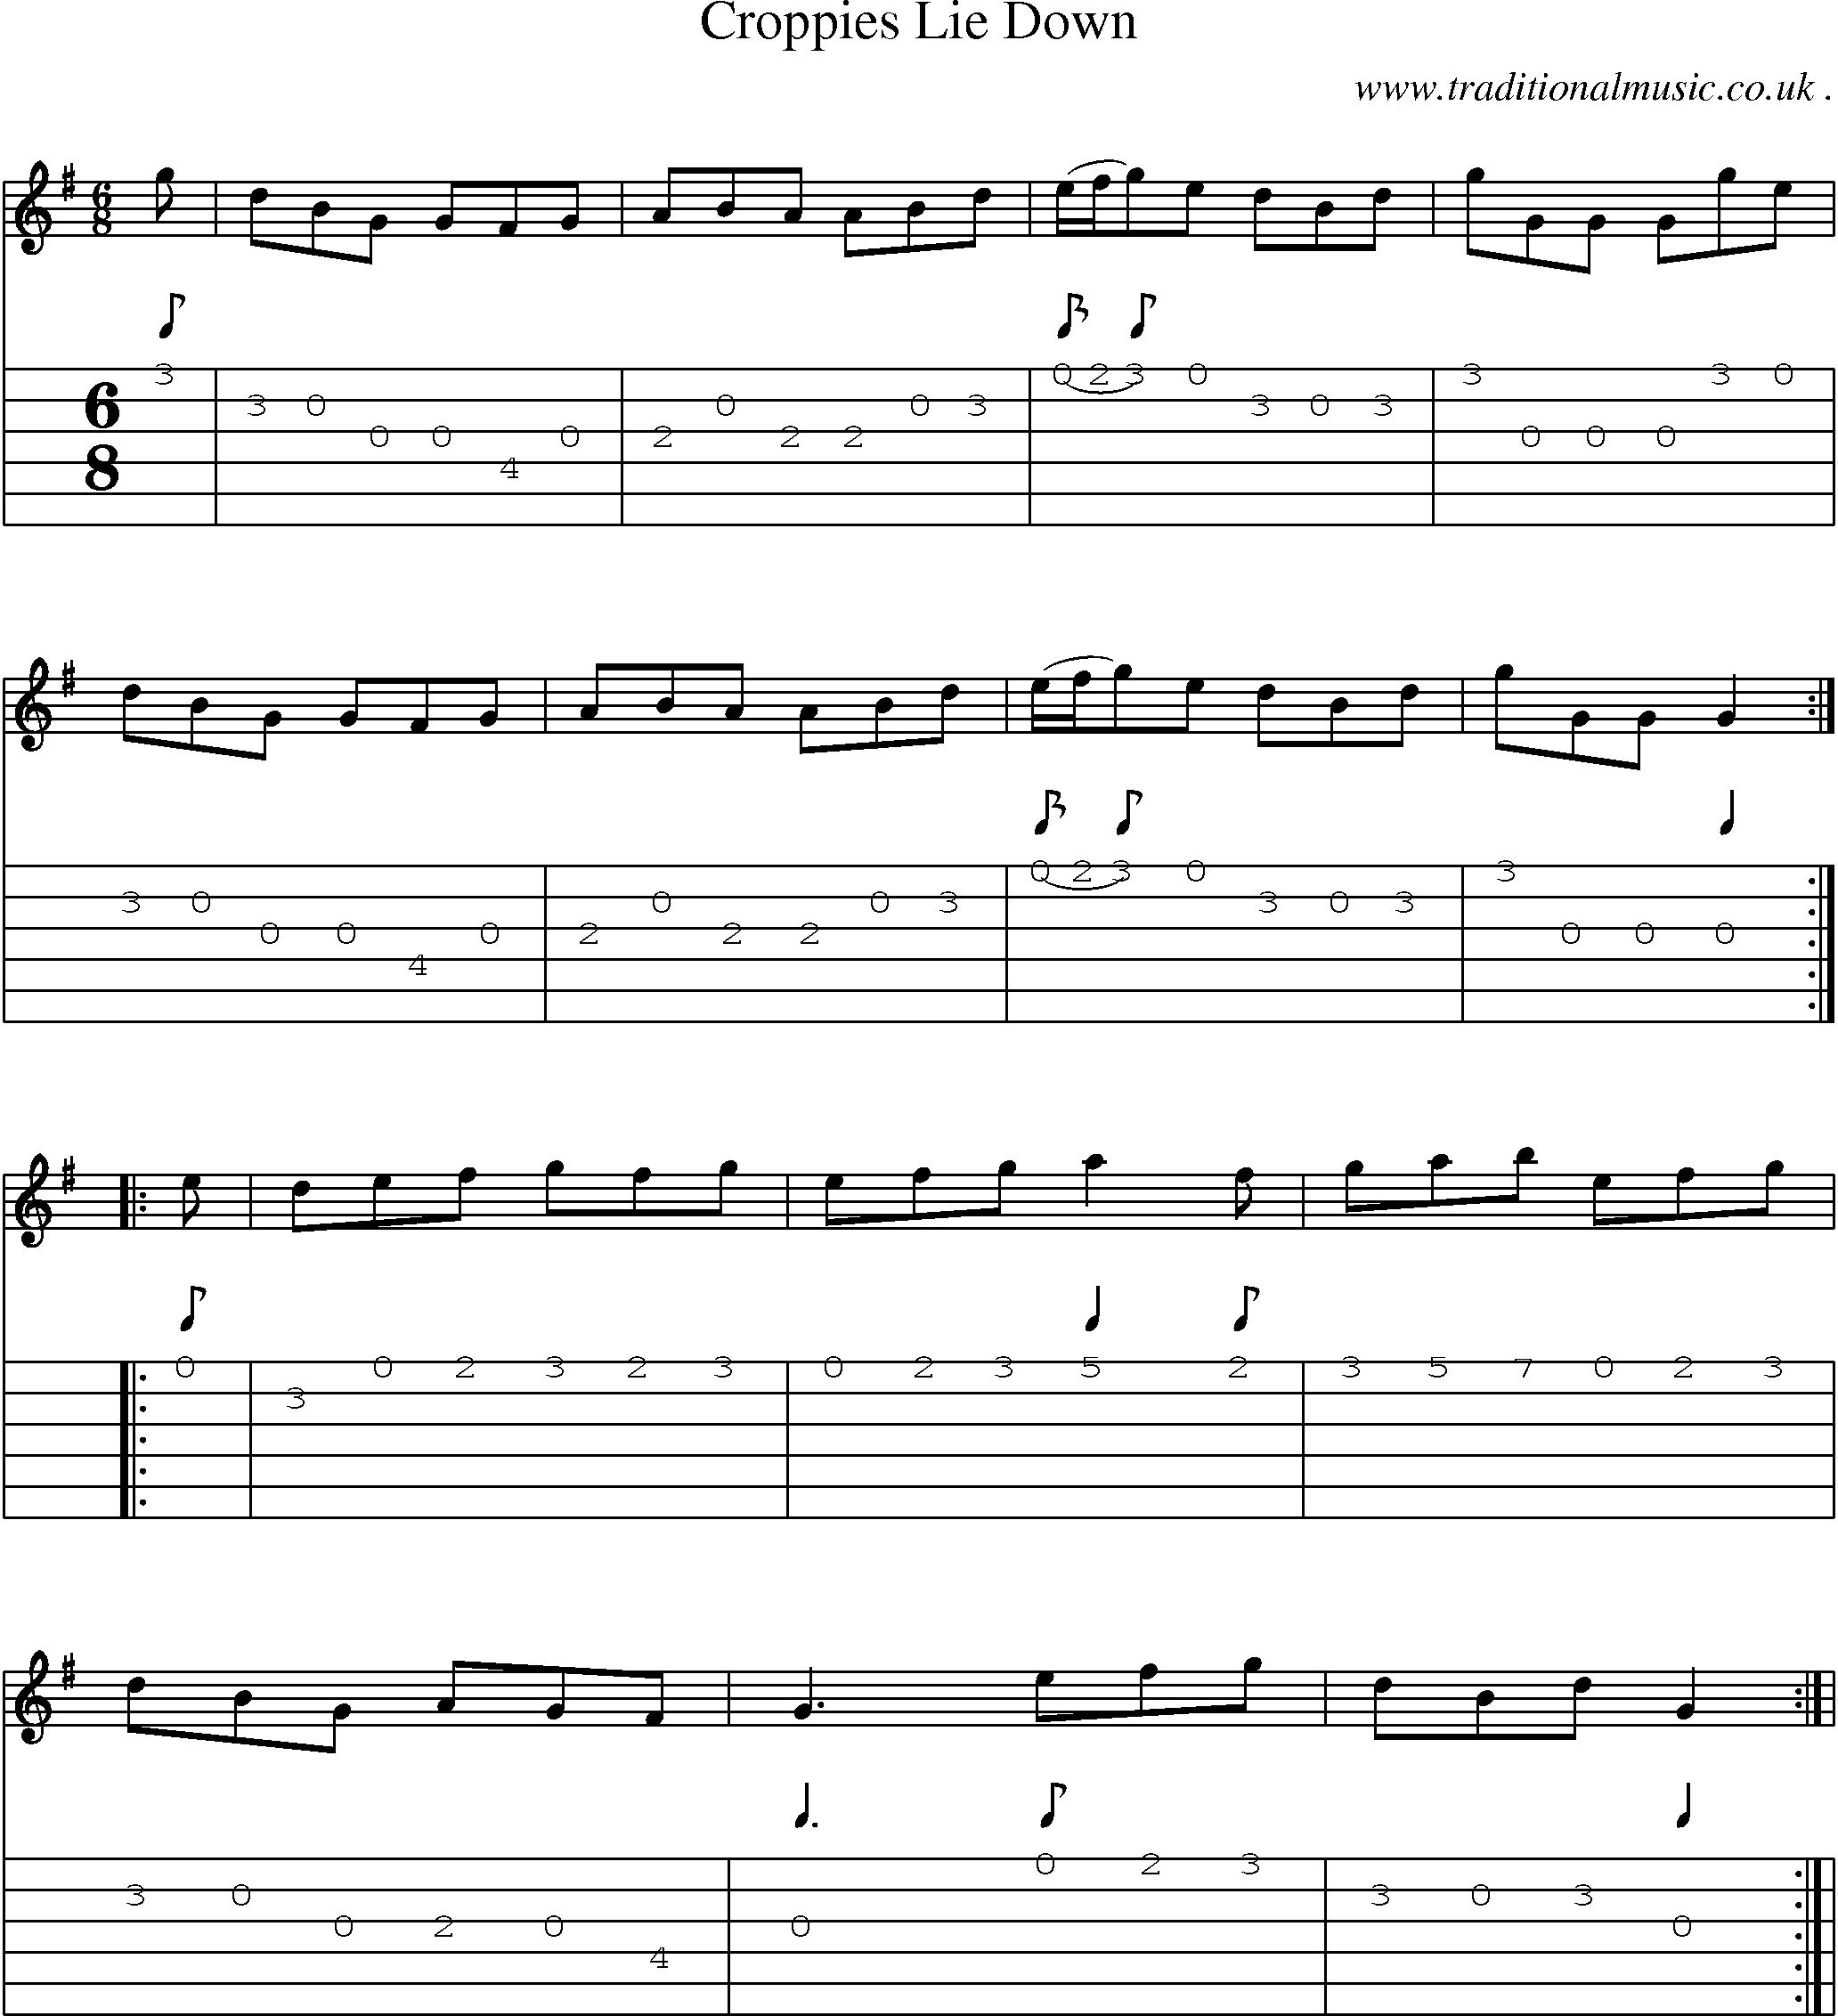 Sheet-Music and Guitar Tabs for Croppies Lie Down